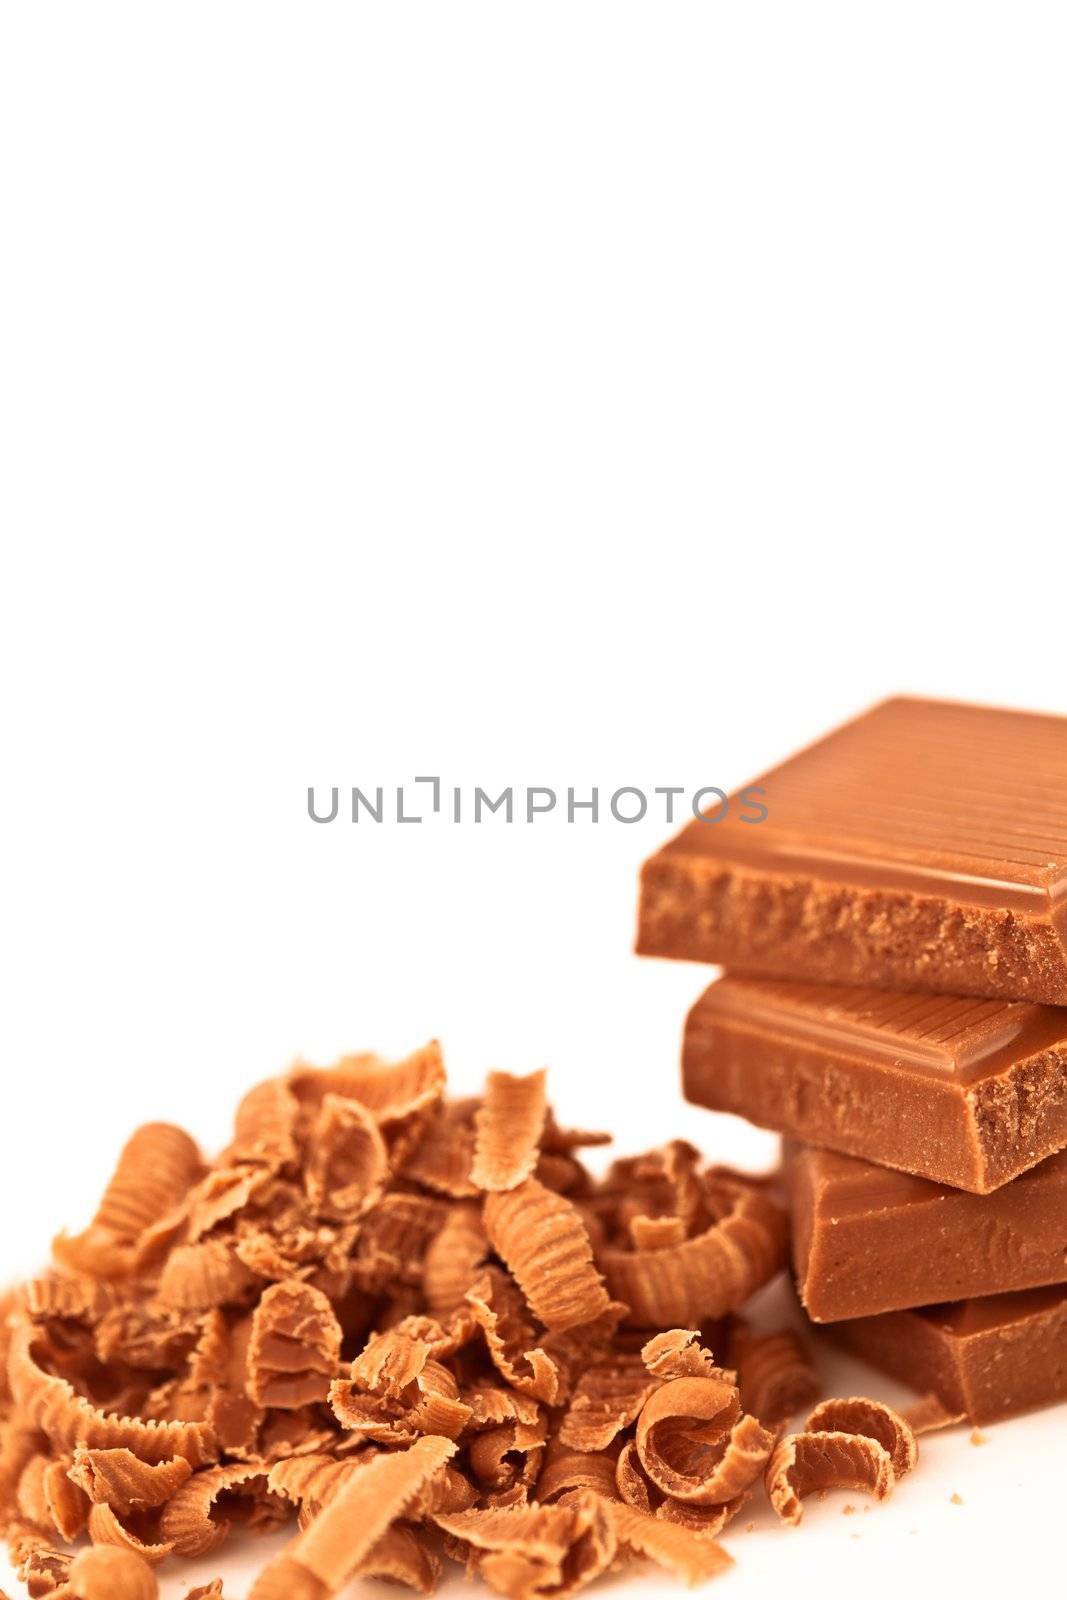 Four pieces of chocolate piled beside chocolate shavings by Wavebreakmedia